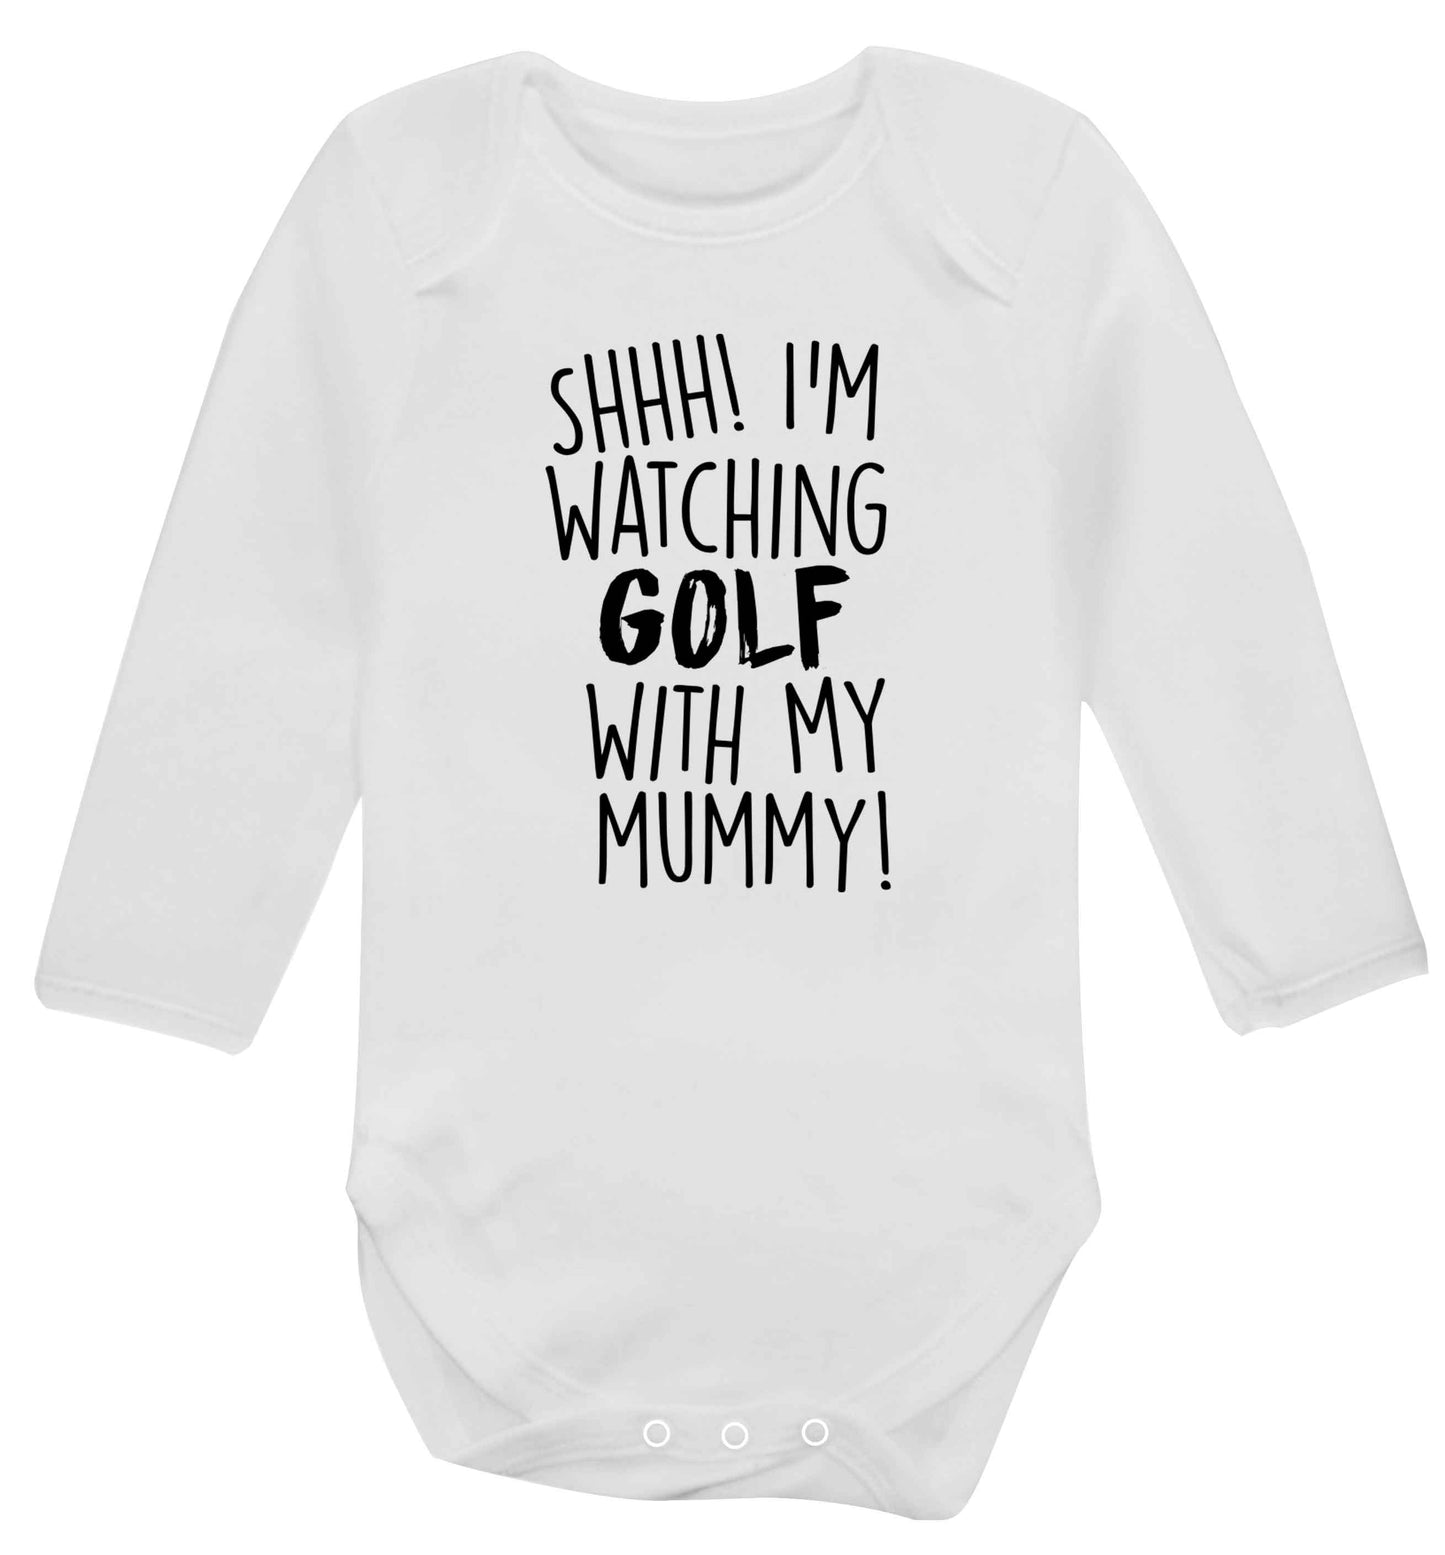 Shh I'm watching golf with my mummy Baby Vest long sleeved white 6-12 months